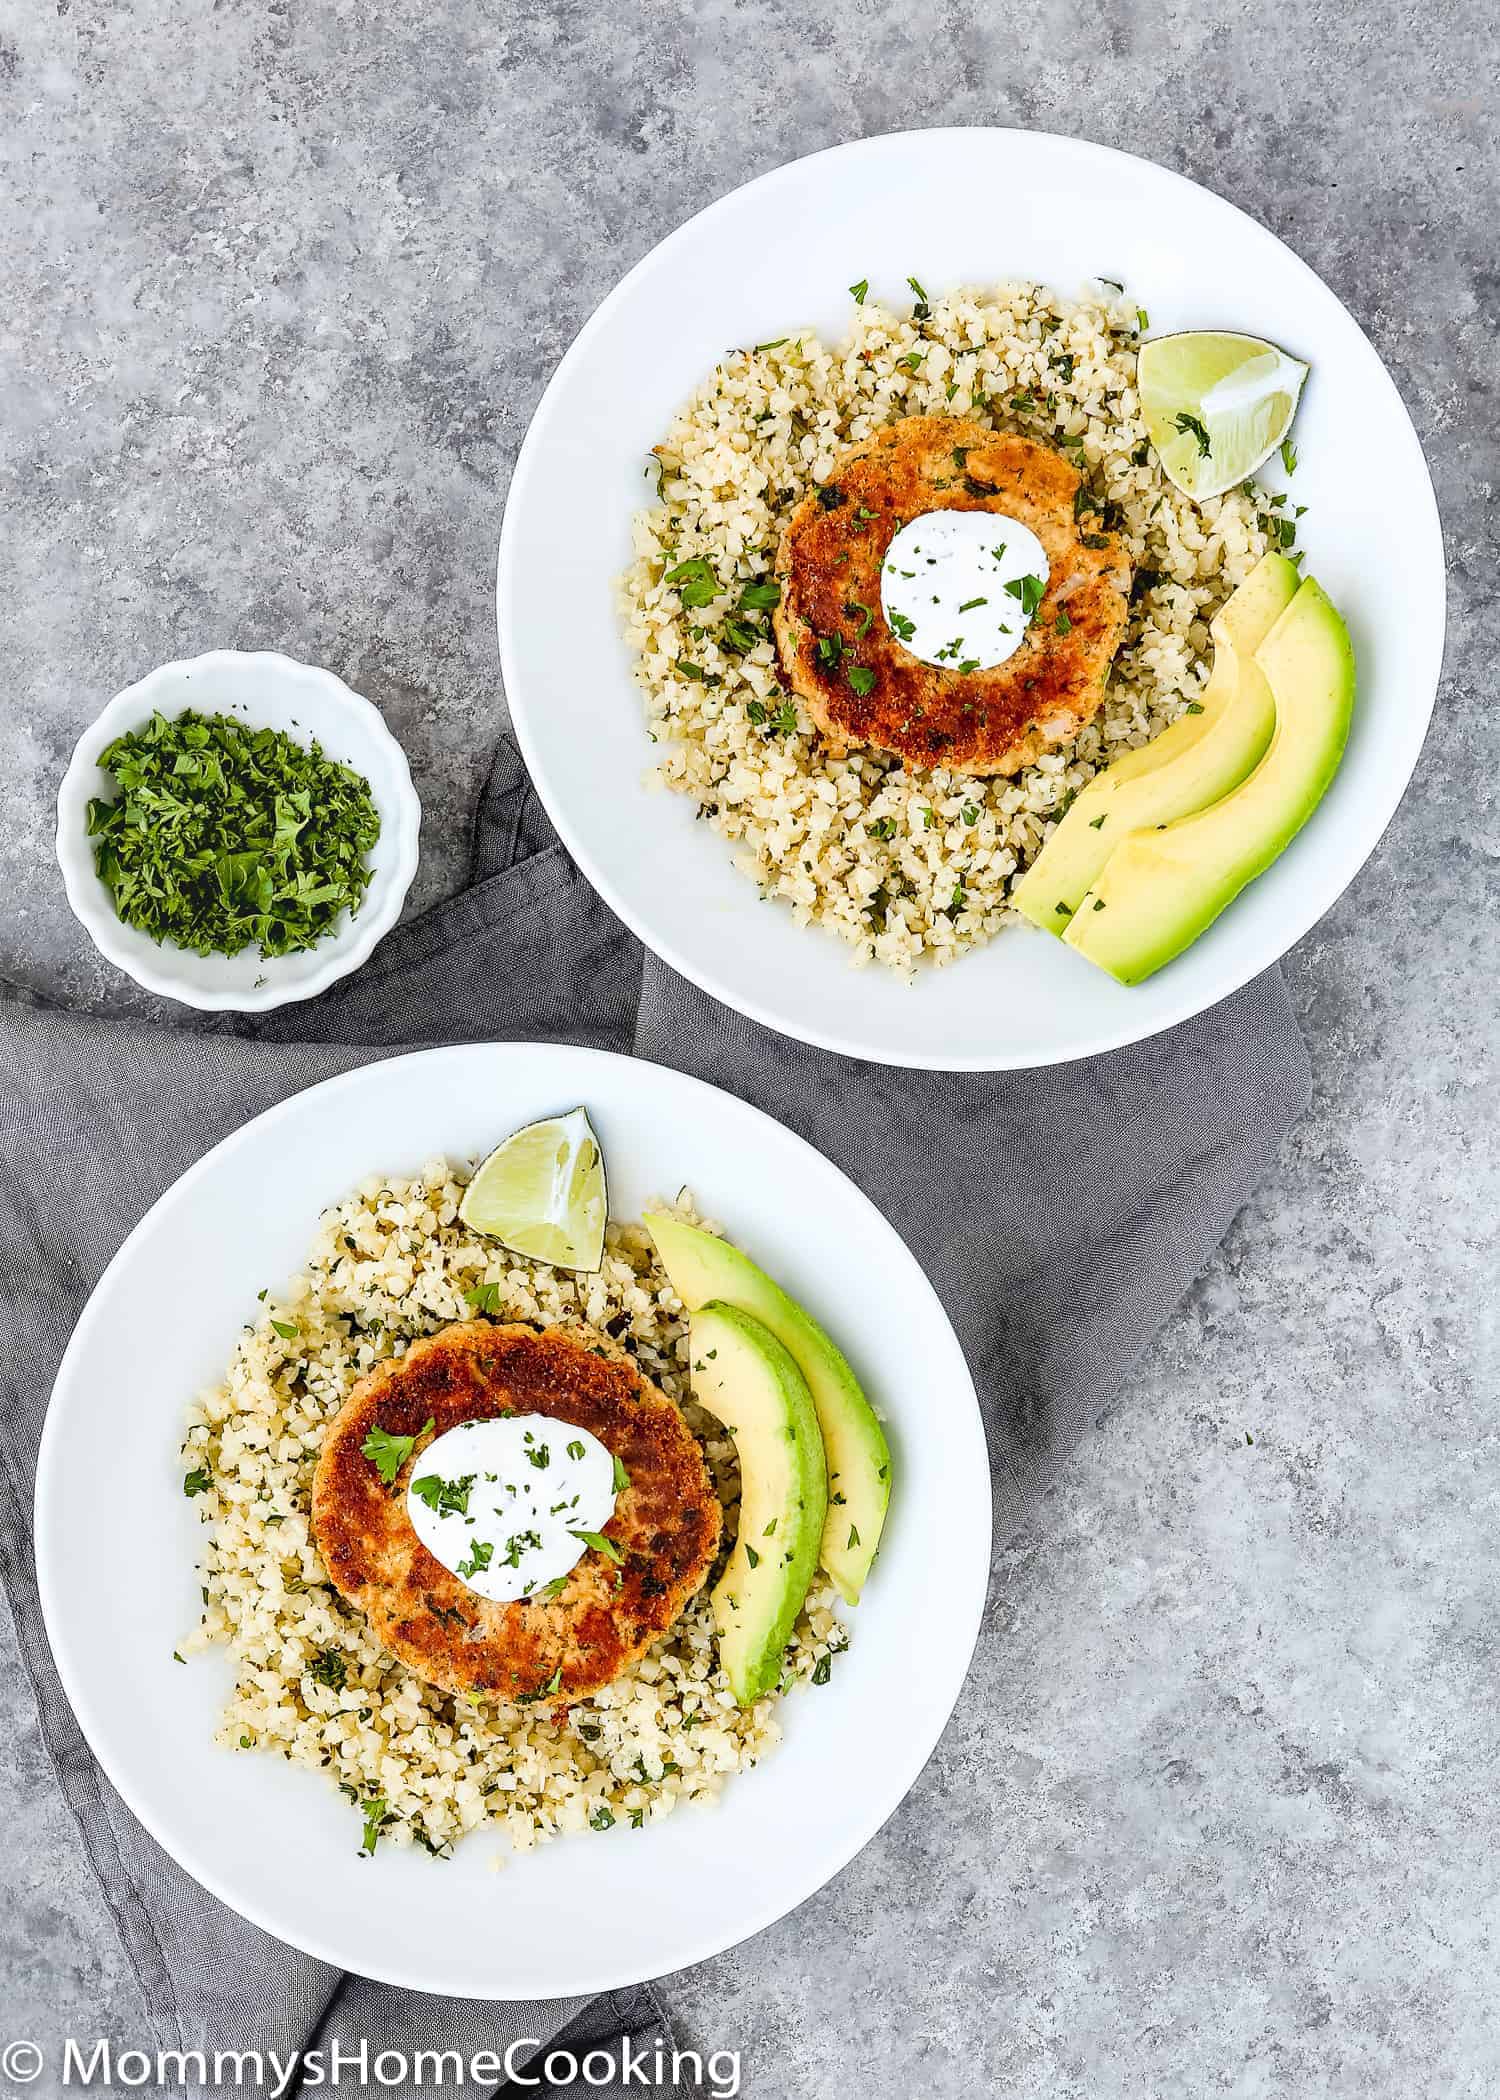 Two plates with Eggless Salmon Patties, Cauliflower rice and avocado.